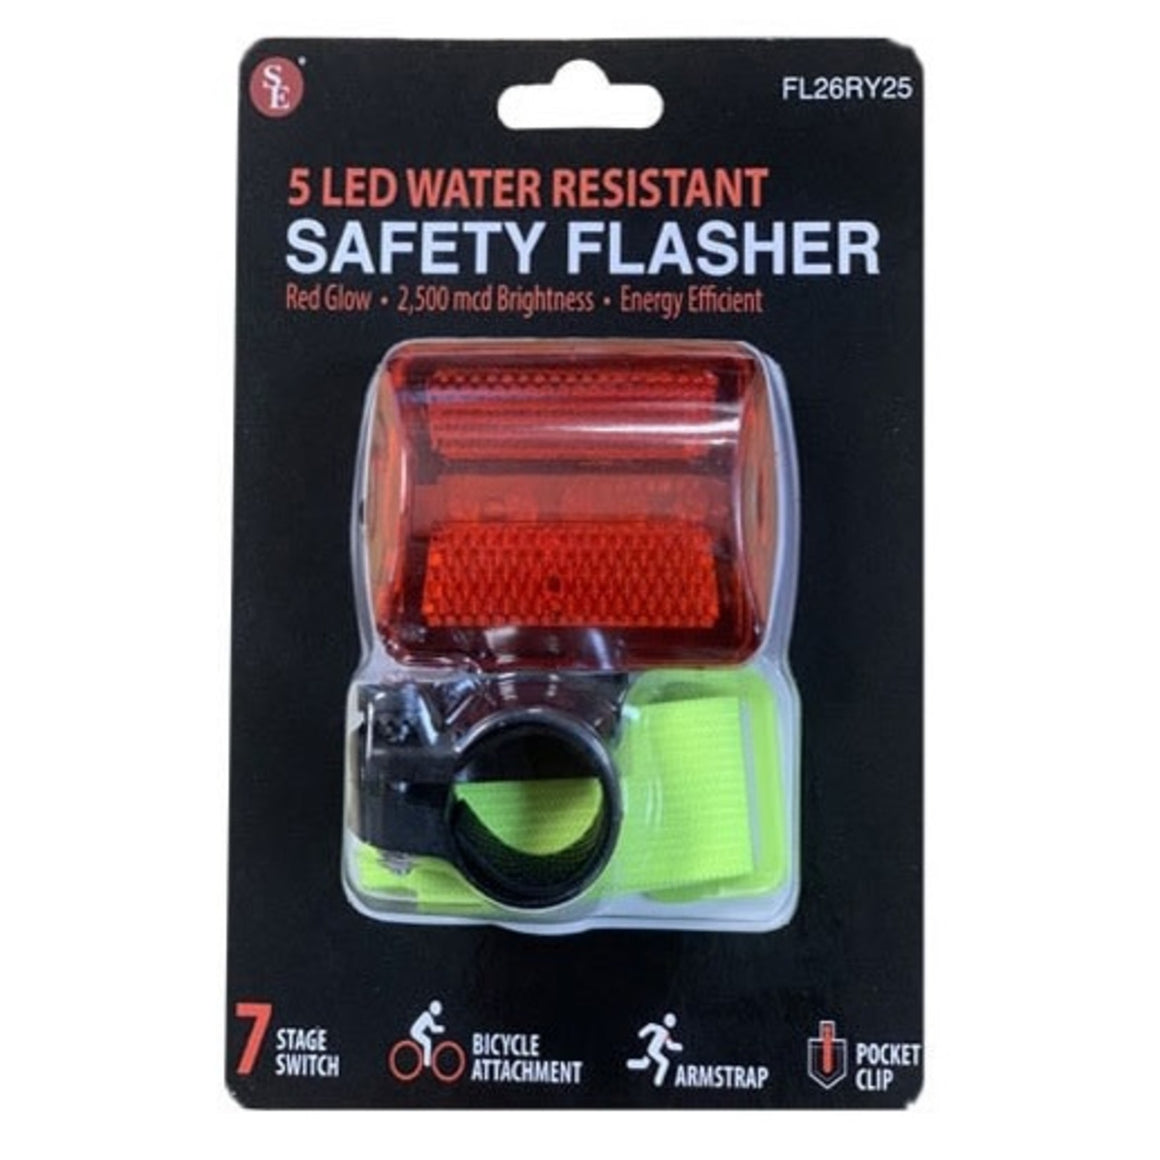 5 LED Water Resistant Safety Flasher